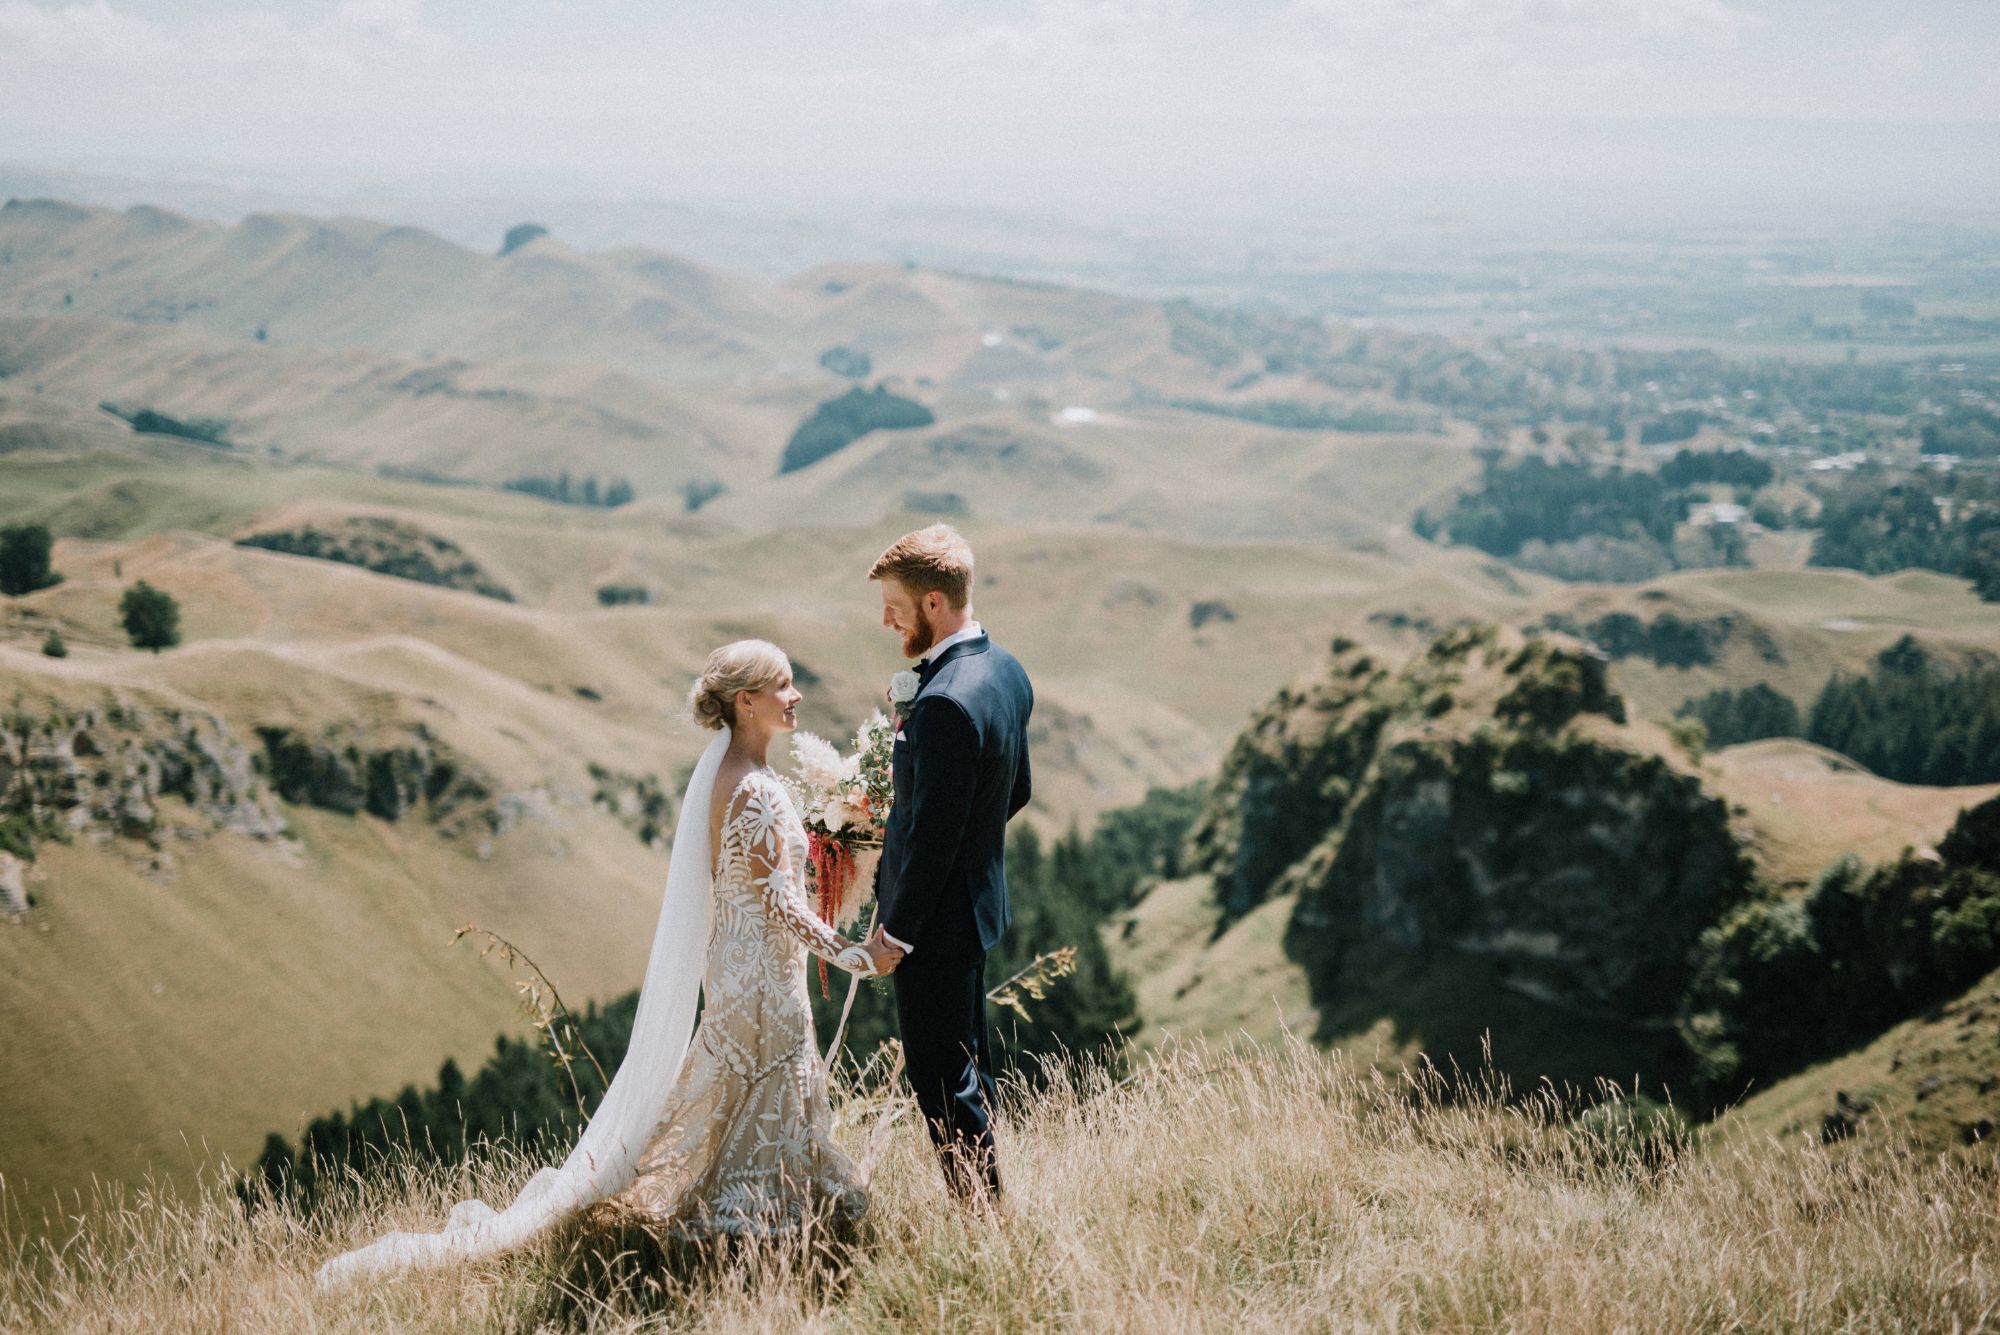 Newlywed couple in atop rural hill.